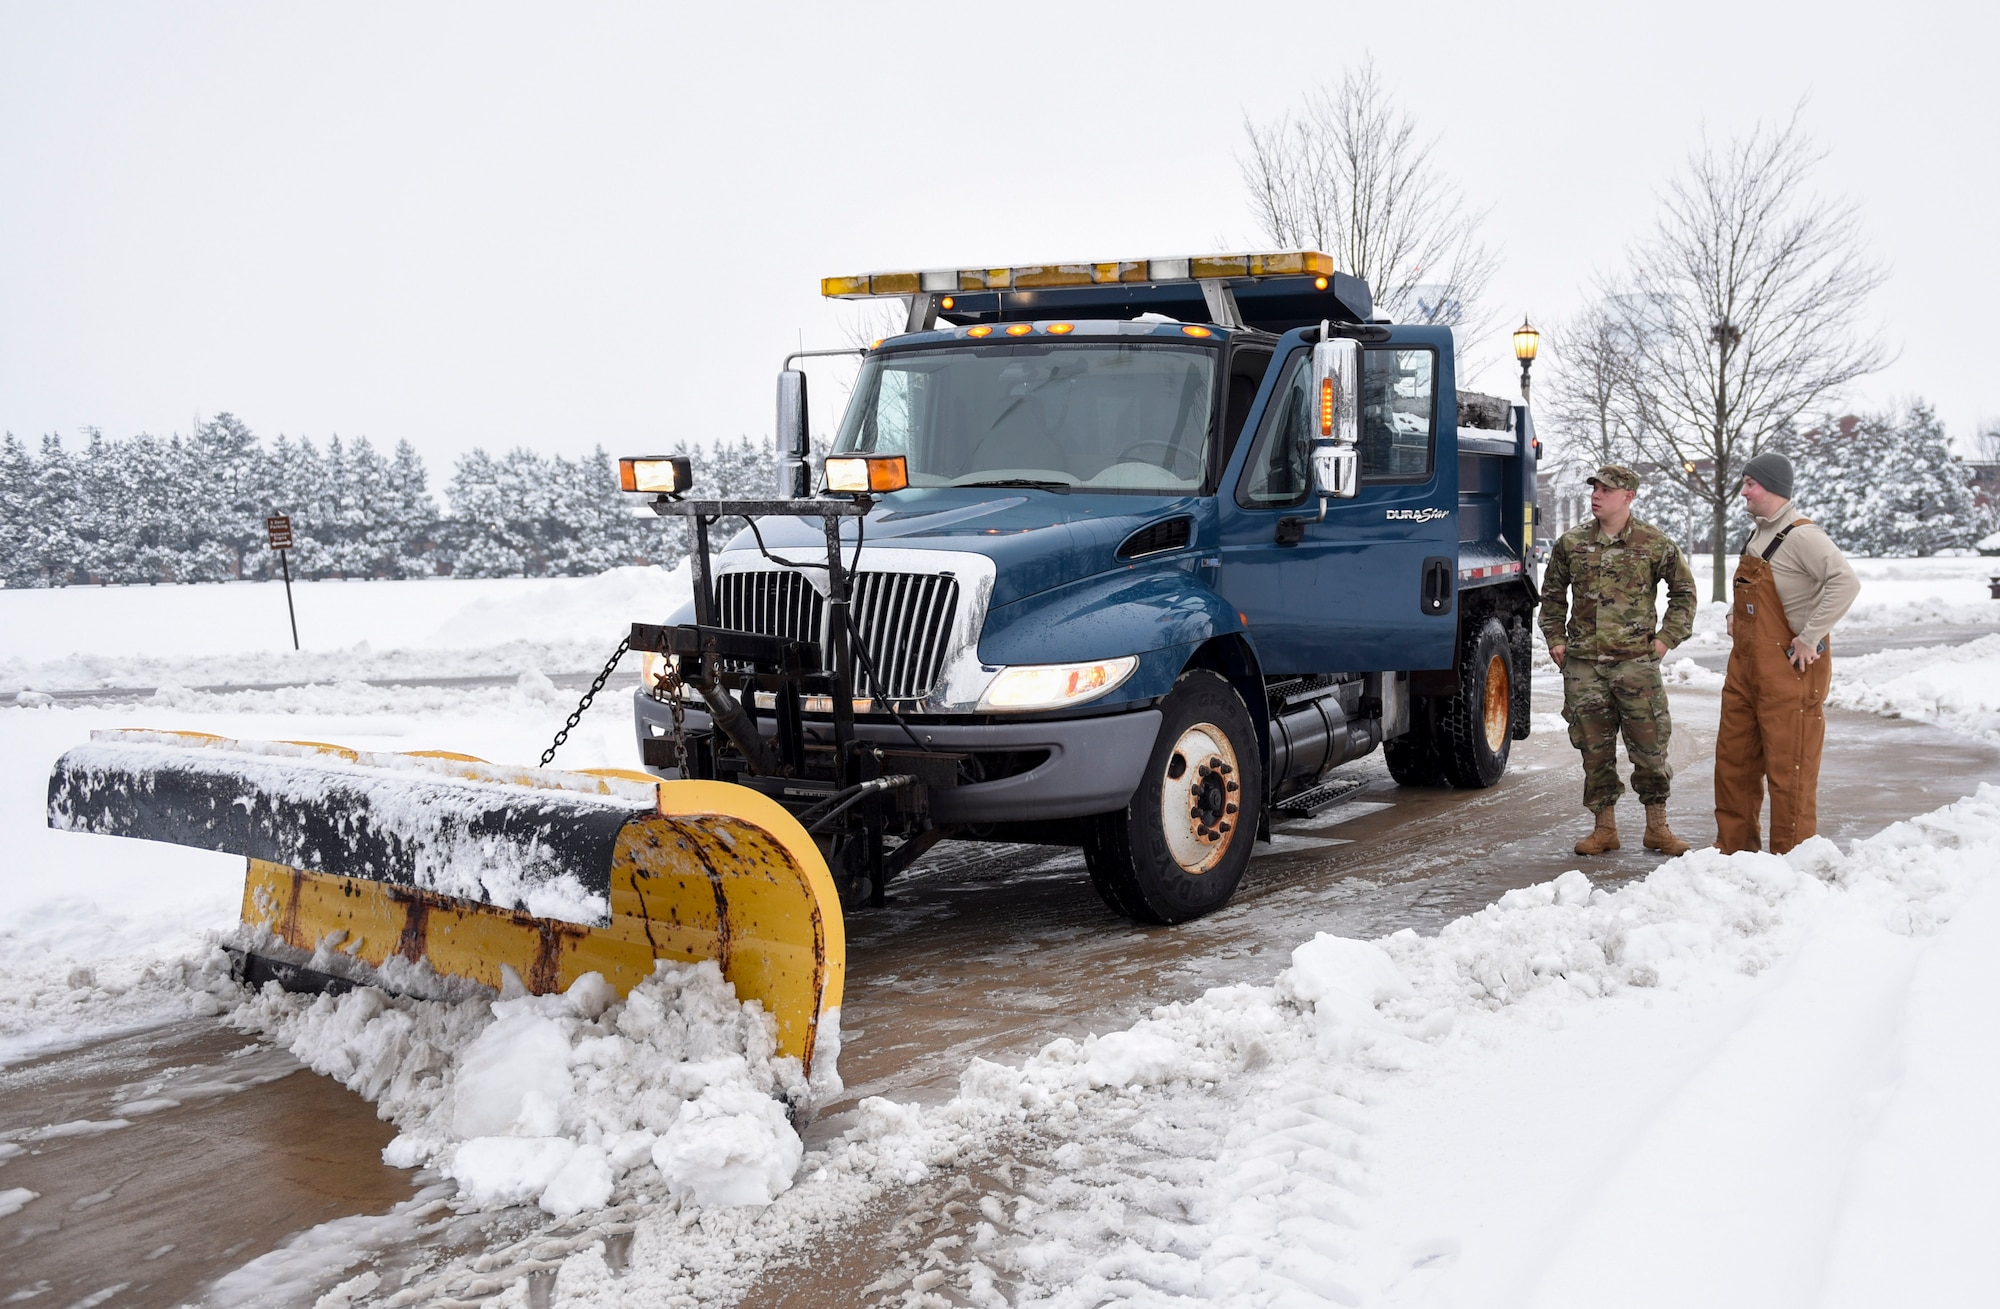 Scott digs out after snowstorm > Scott Air Force Base > Article Display